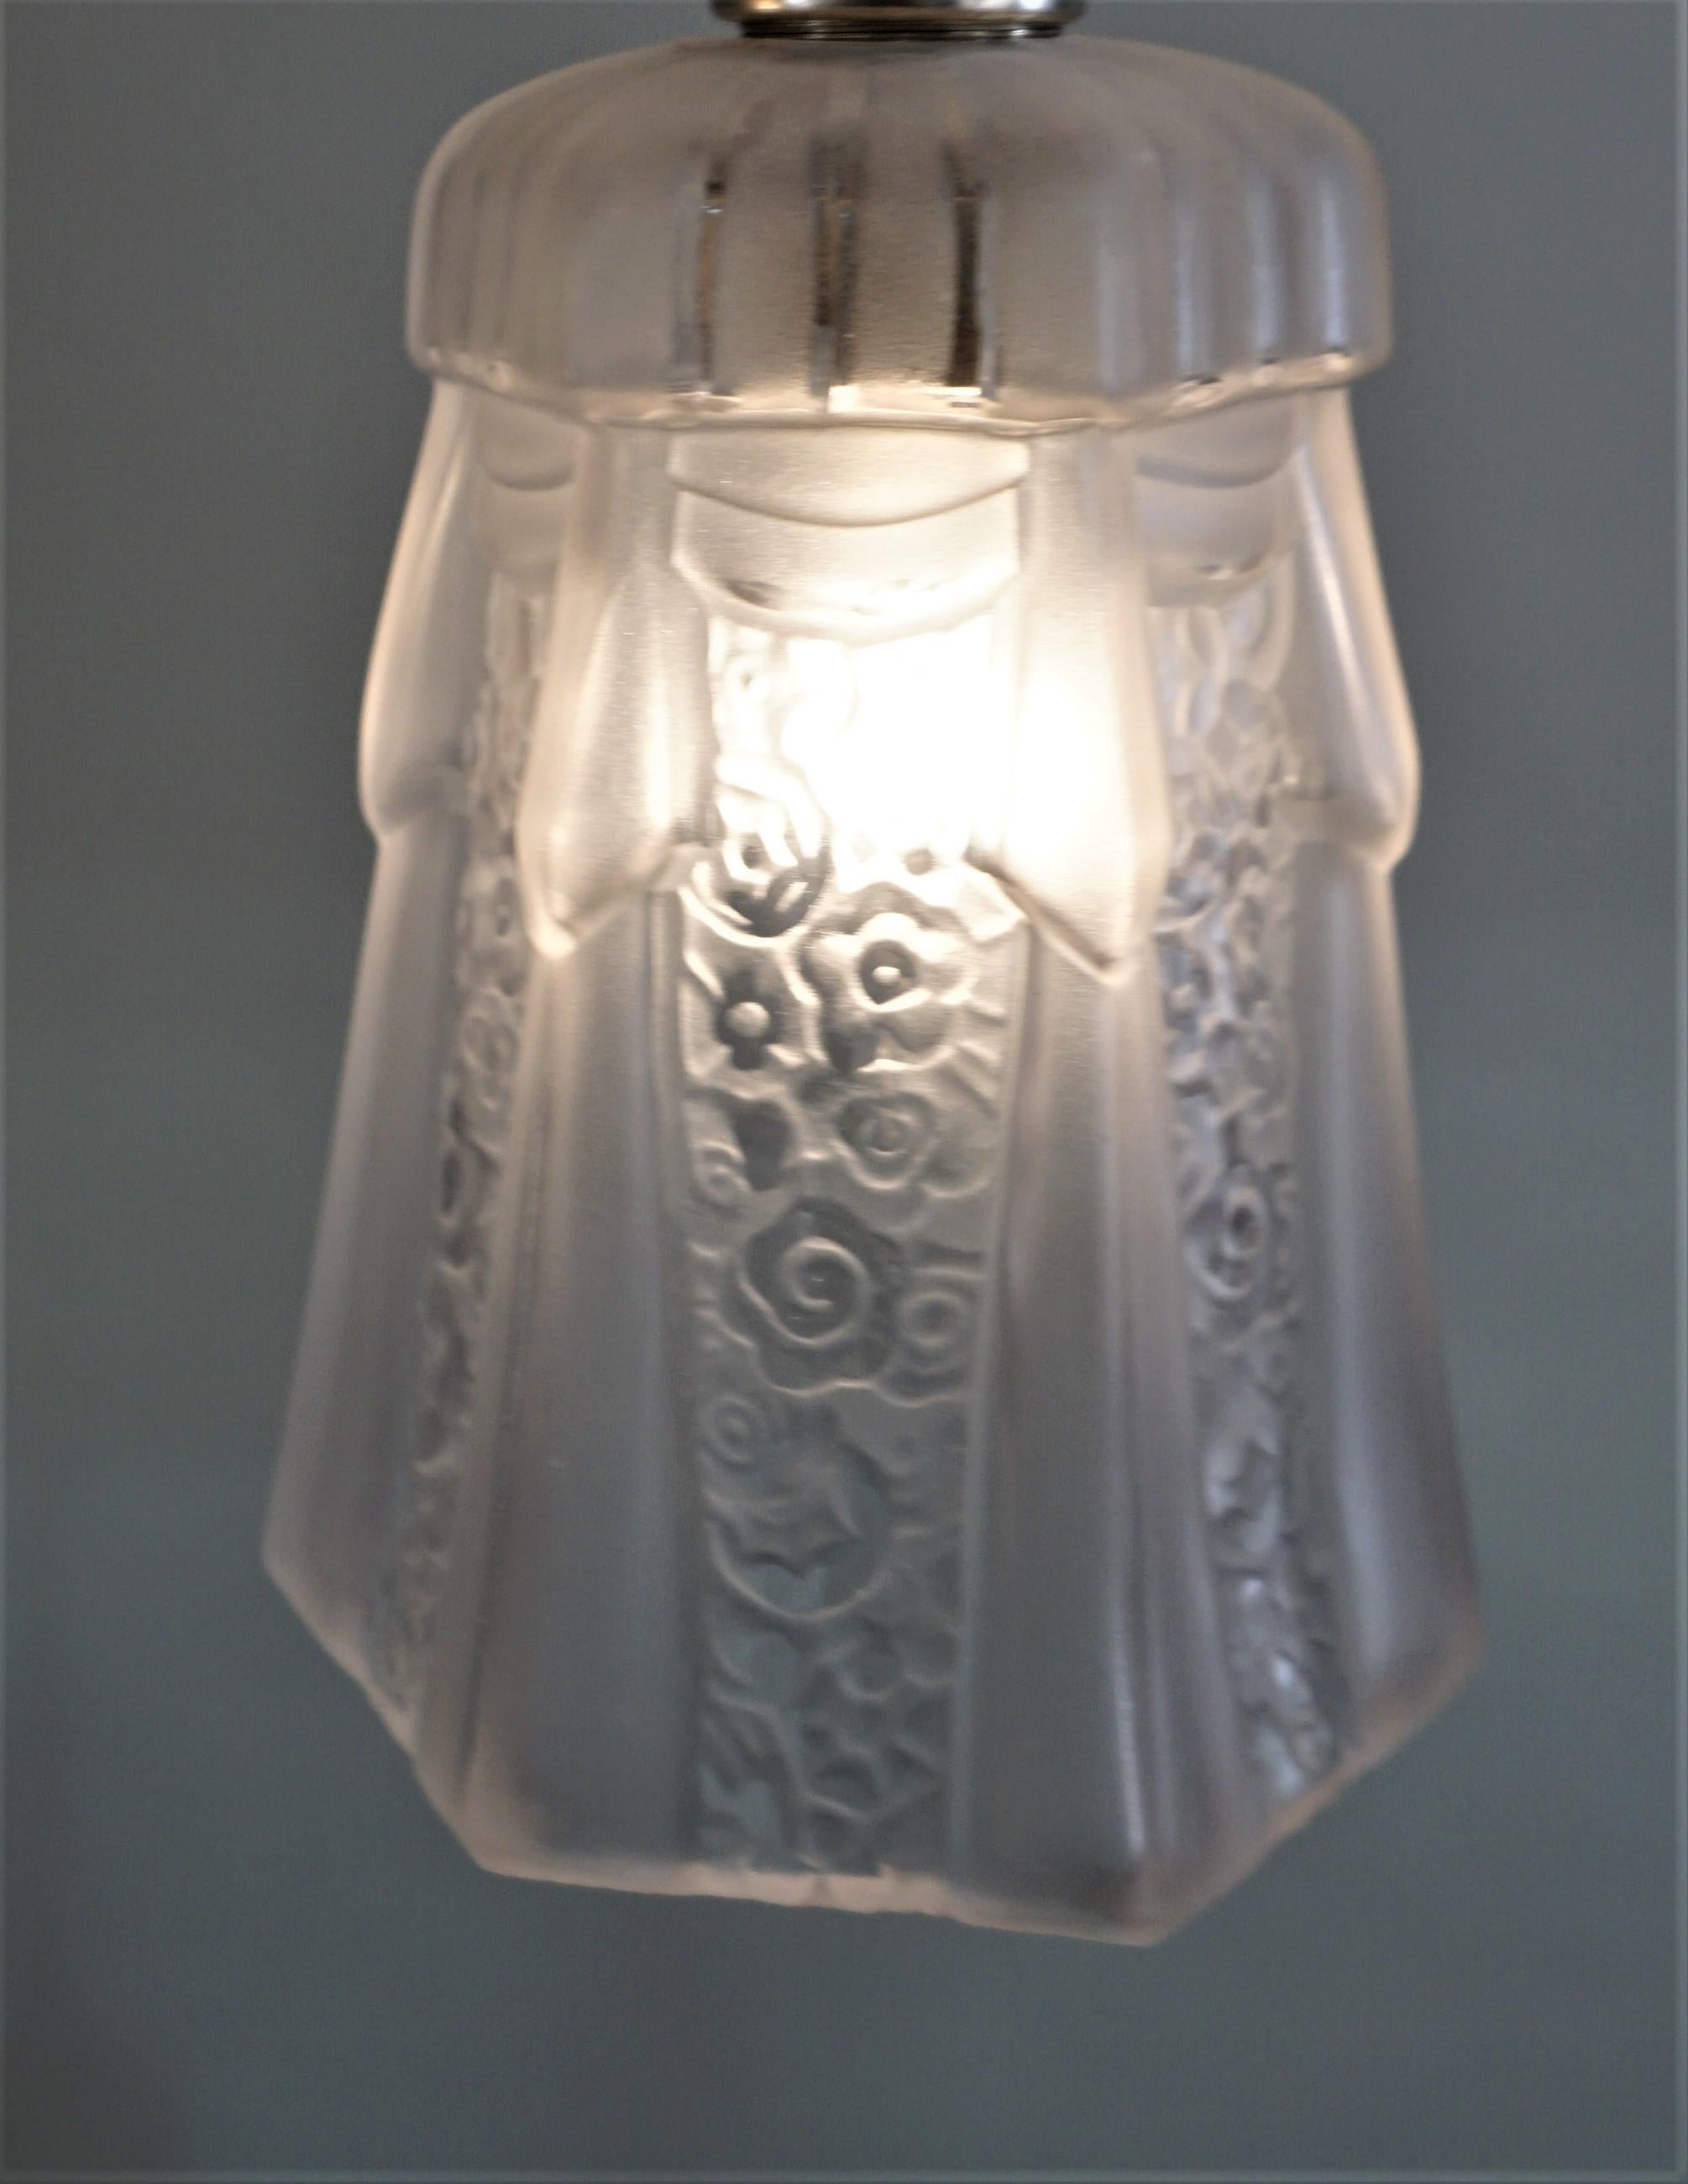 Set of Three 1930s Art Deco Glass Shade Pendant Light In Good Condition For Sale In Fairfax, VA